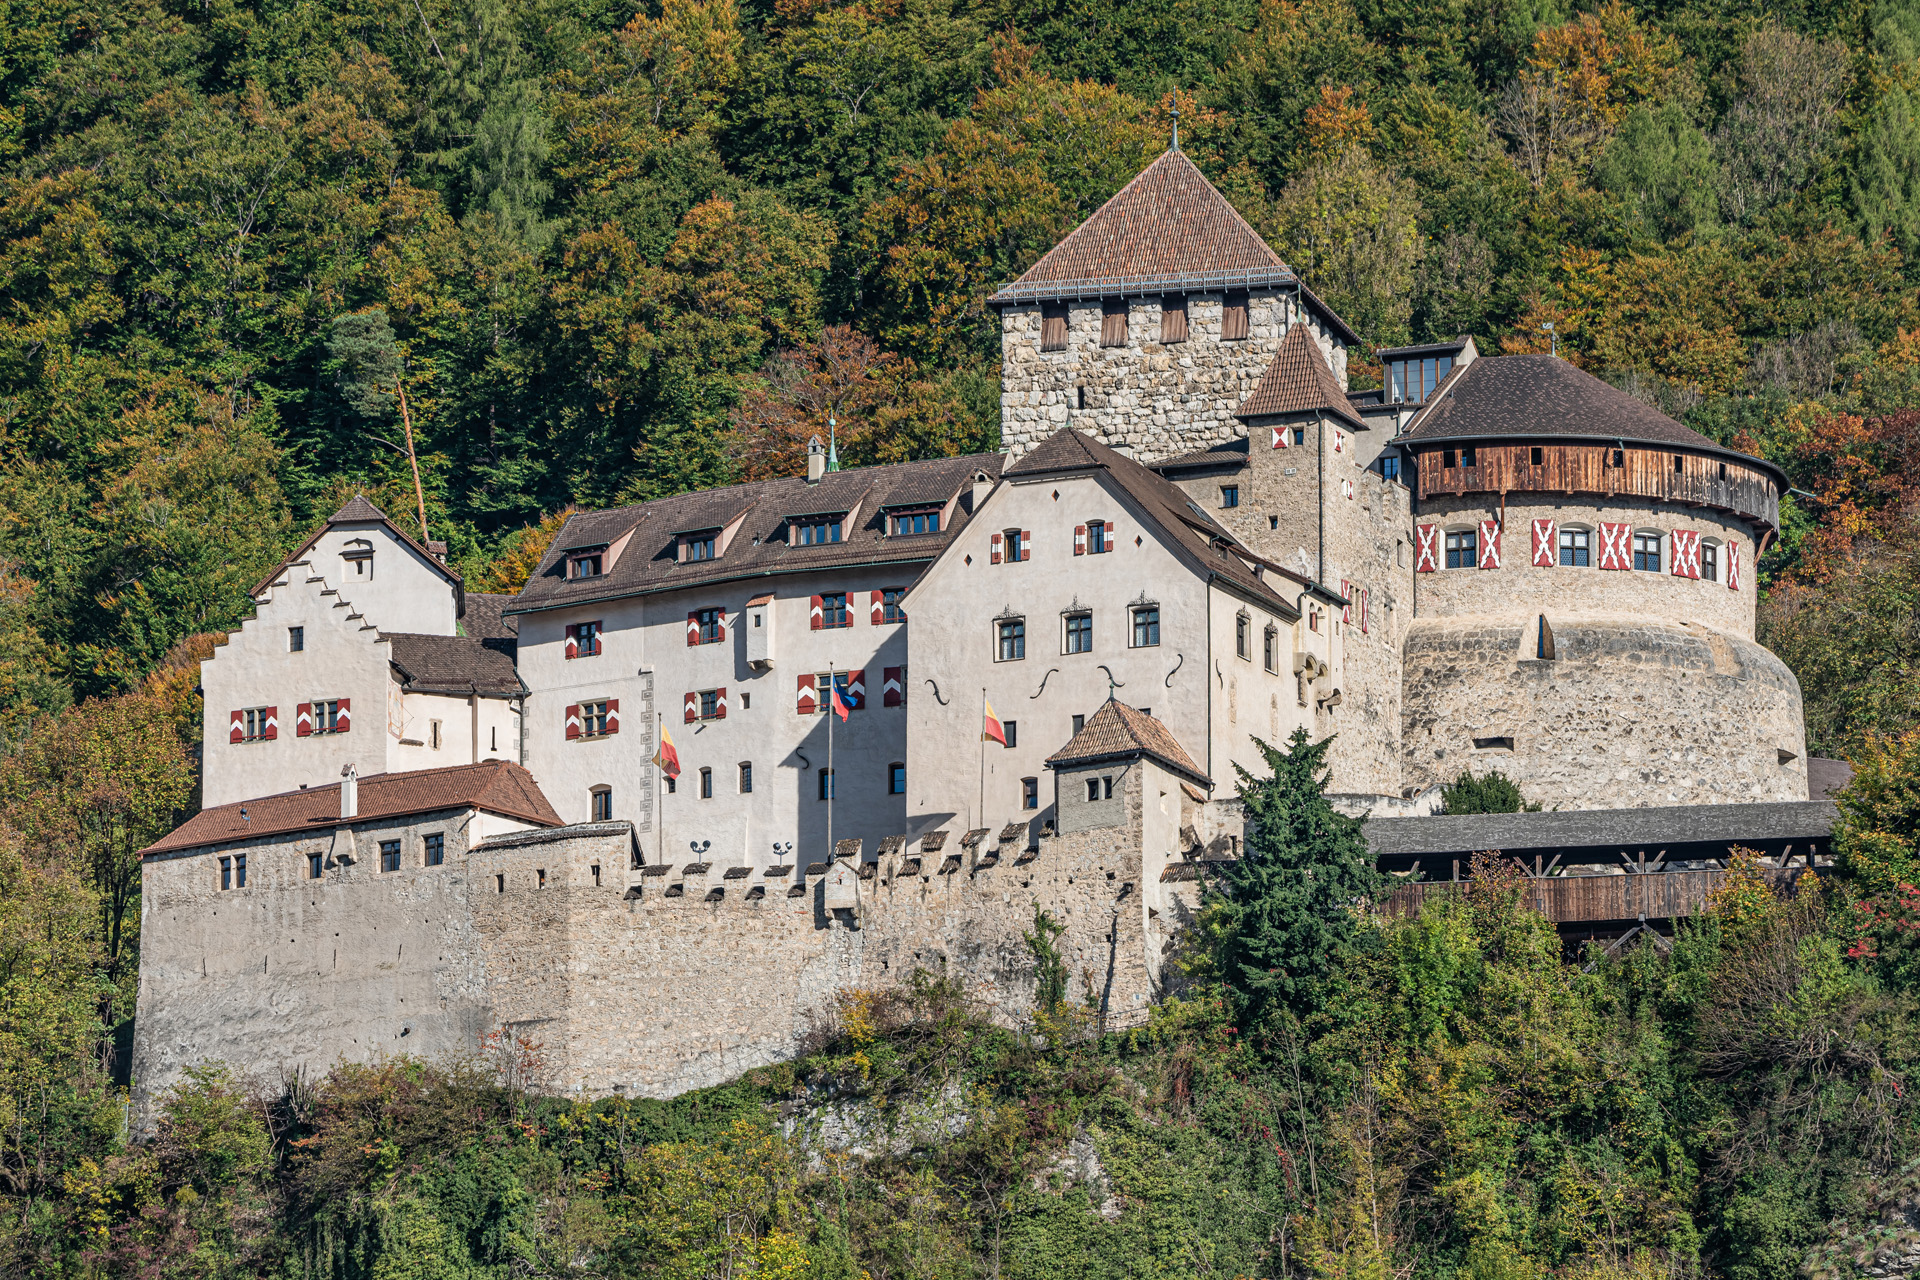 Vaduz Castle, the palace and official residence of the Prince of Liechtenstein